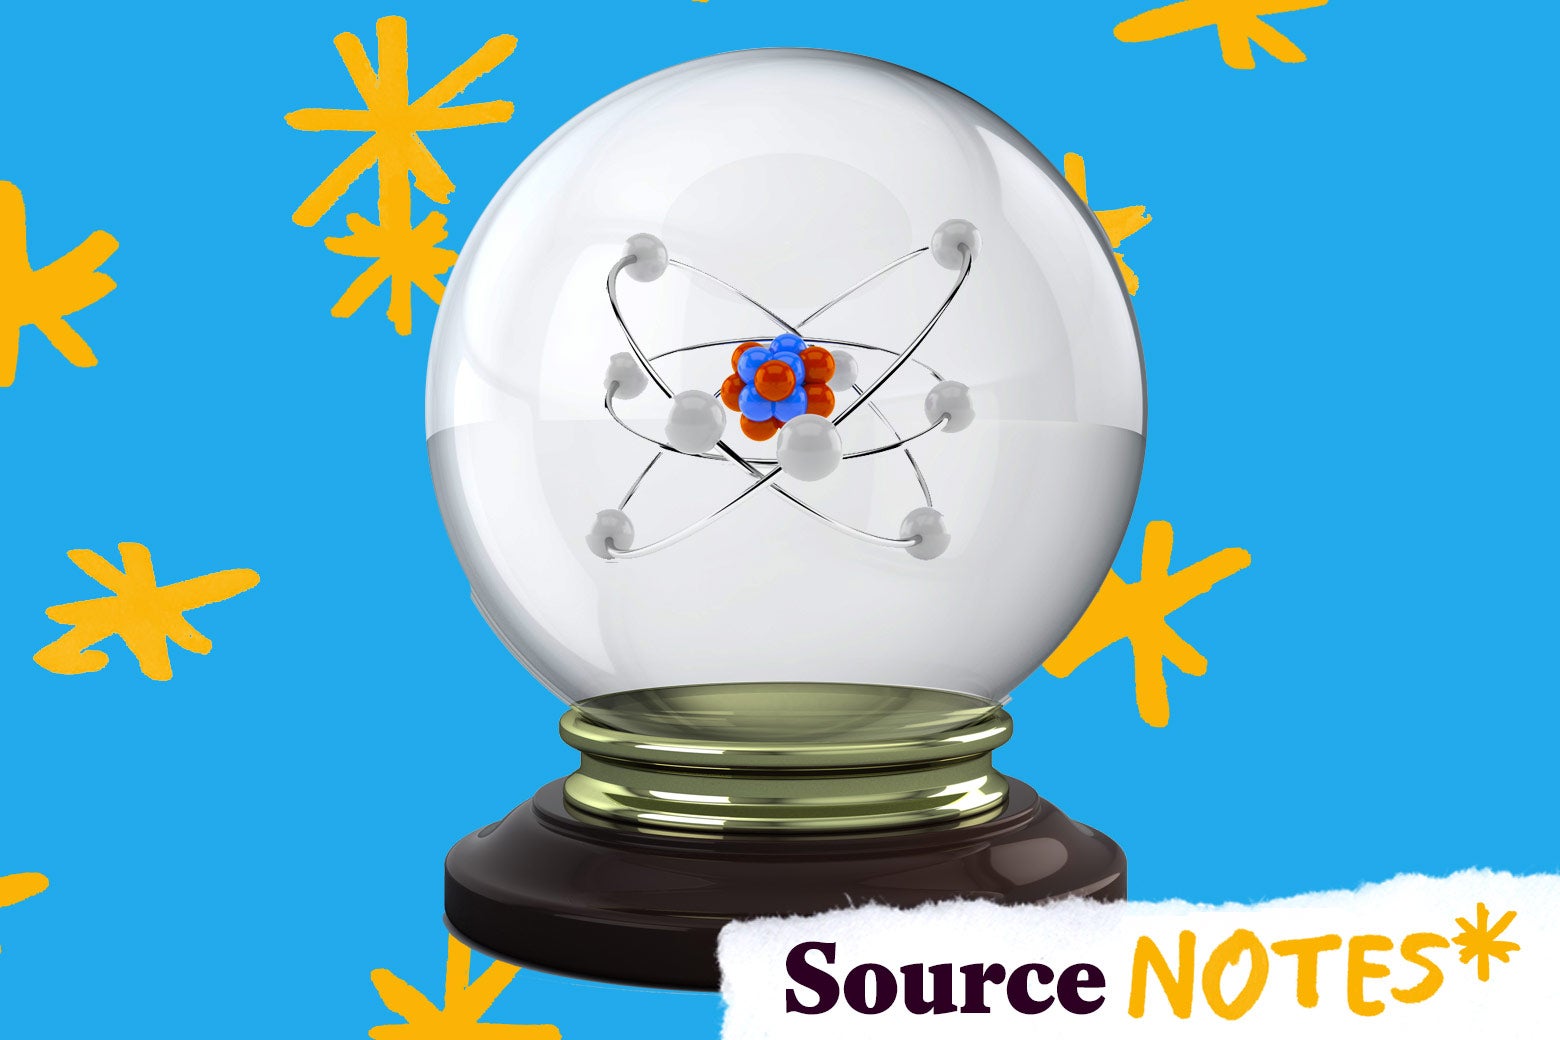 Electroncs swirl around an atom within a crystal ball. The background is blue with hand-drawn yellow asterisks; a label says Source Notes*.